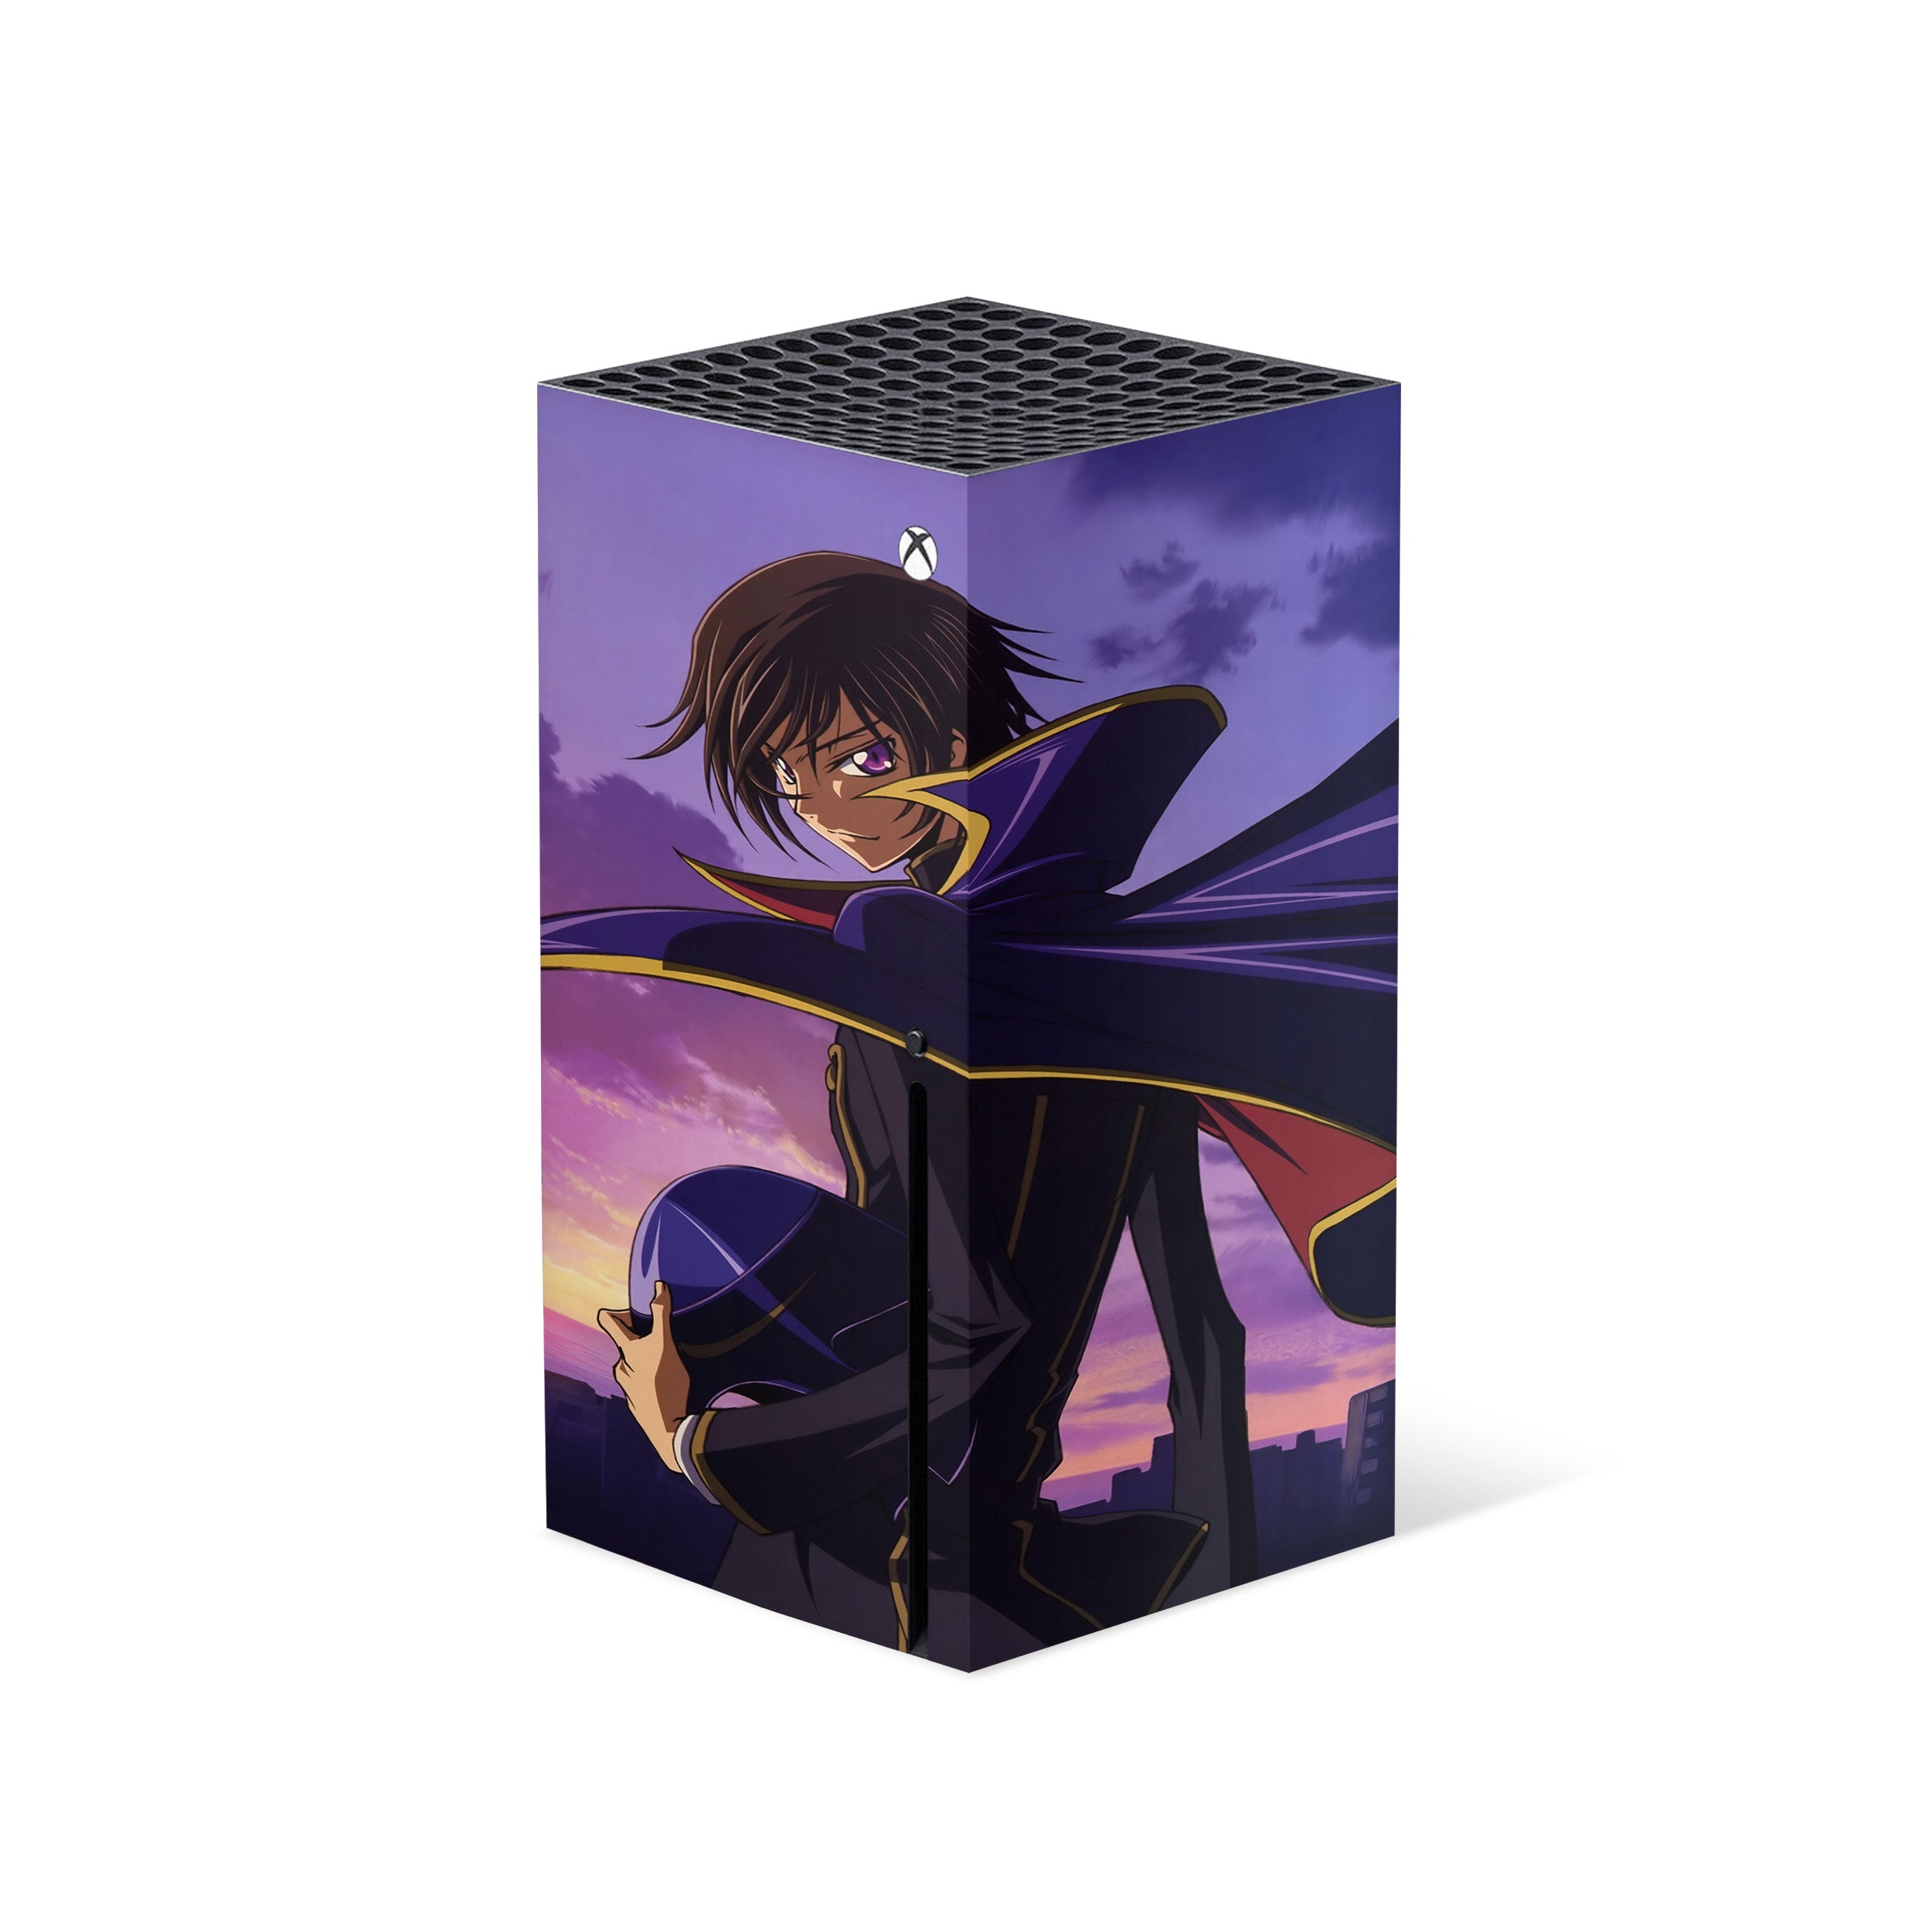 A video game skin featuring a Code Geass Lelouch Lamperoug design for the Xbox Series X.